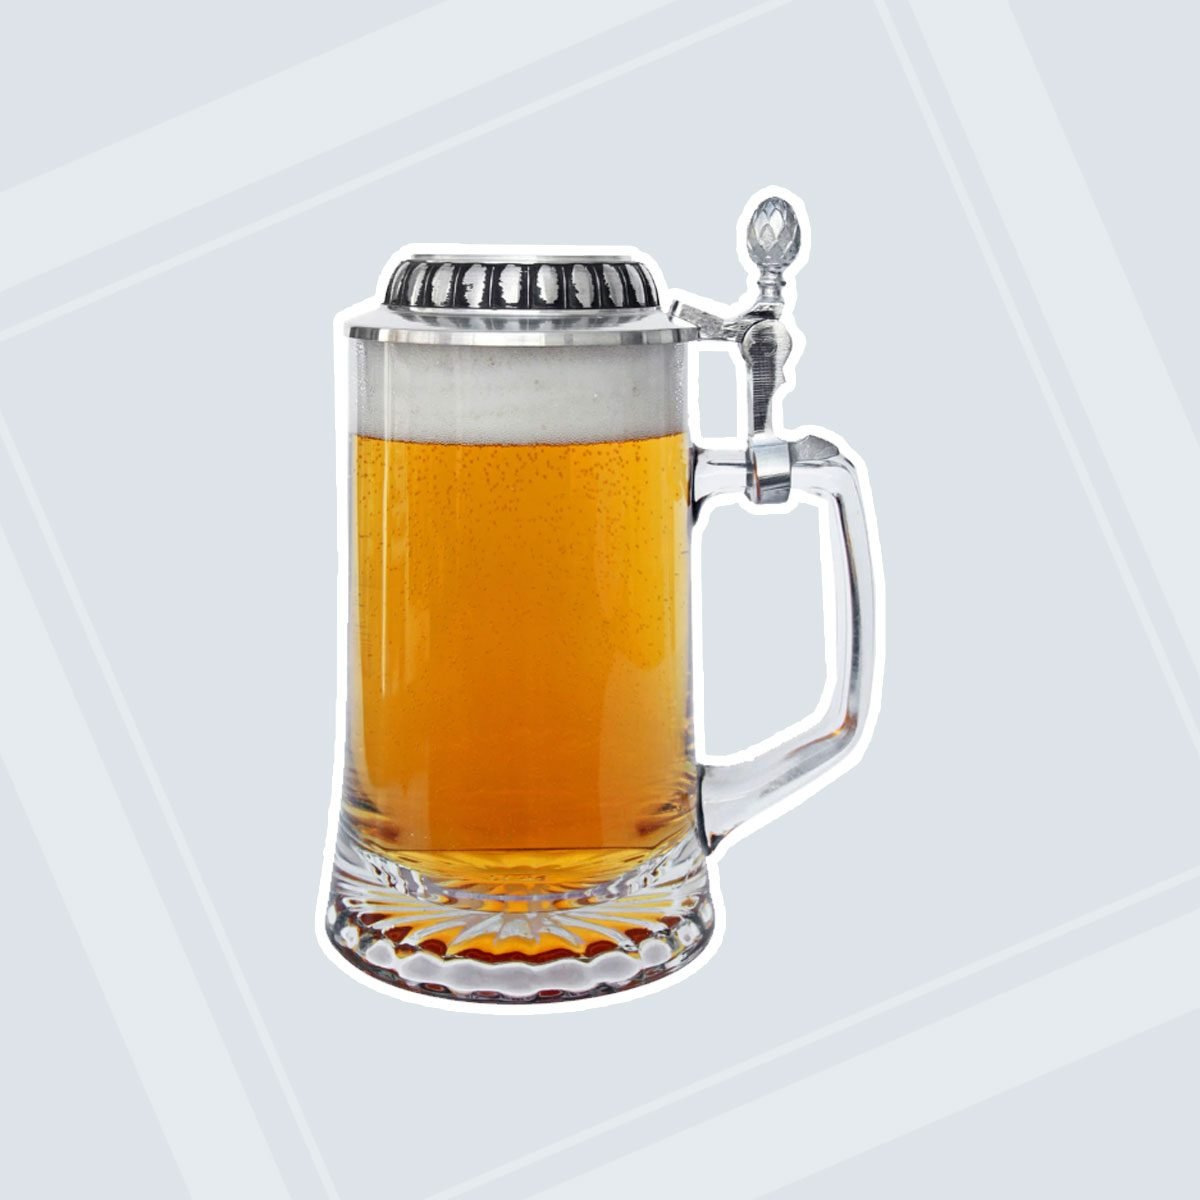 10 Cool Beer Stein Ideas To Add To Your Collection Taste Of Home